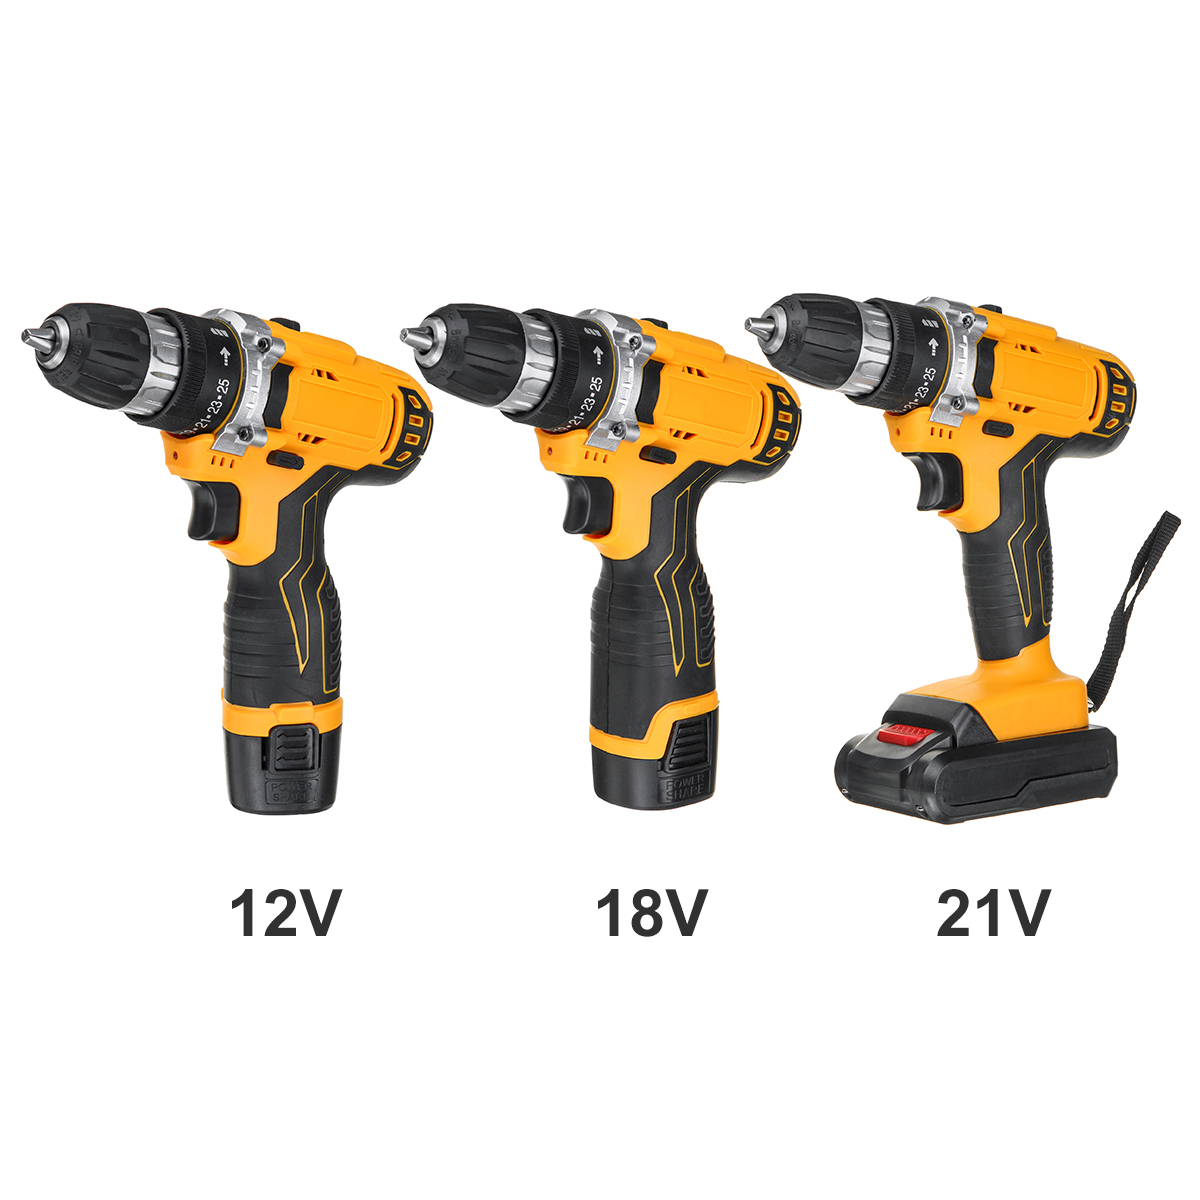 121821V-251-Torque-2-Speed-Cordless-Electric-Drill-Screwdriver-W-LED-Light-1733758-6